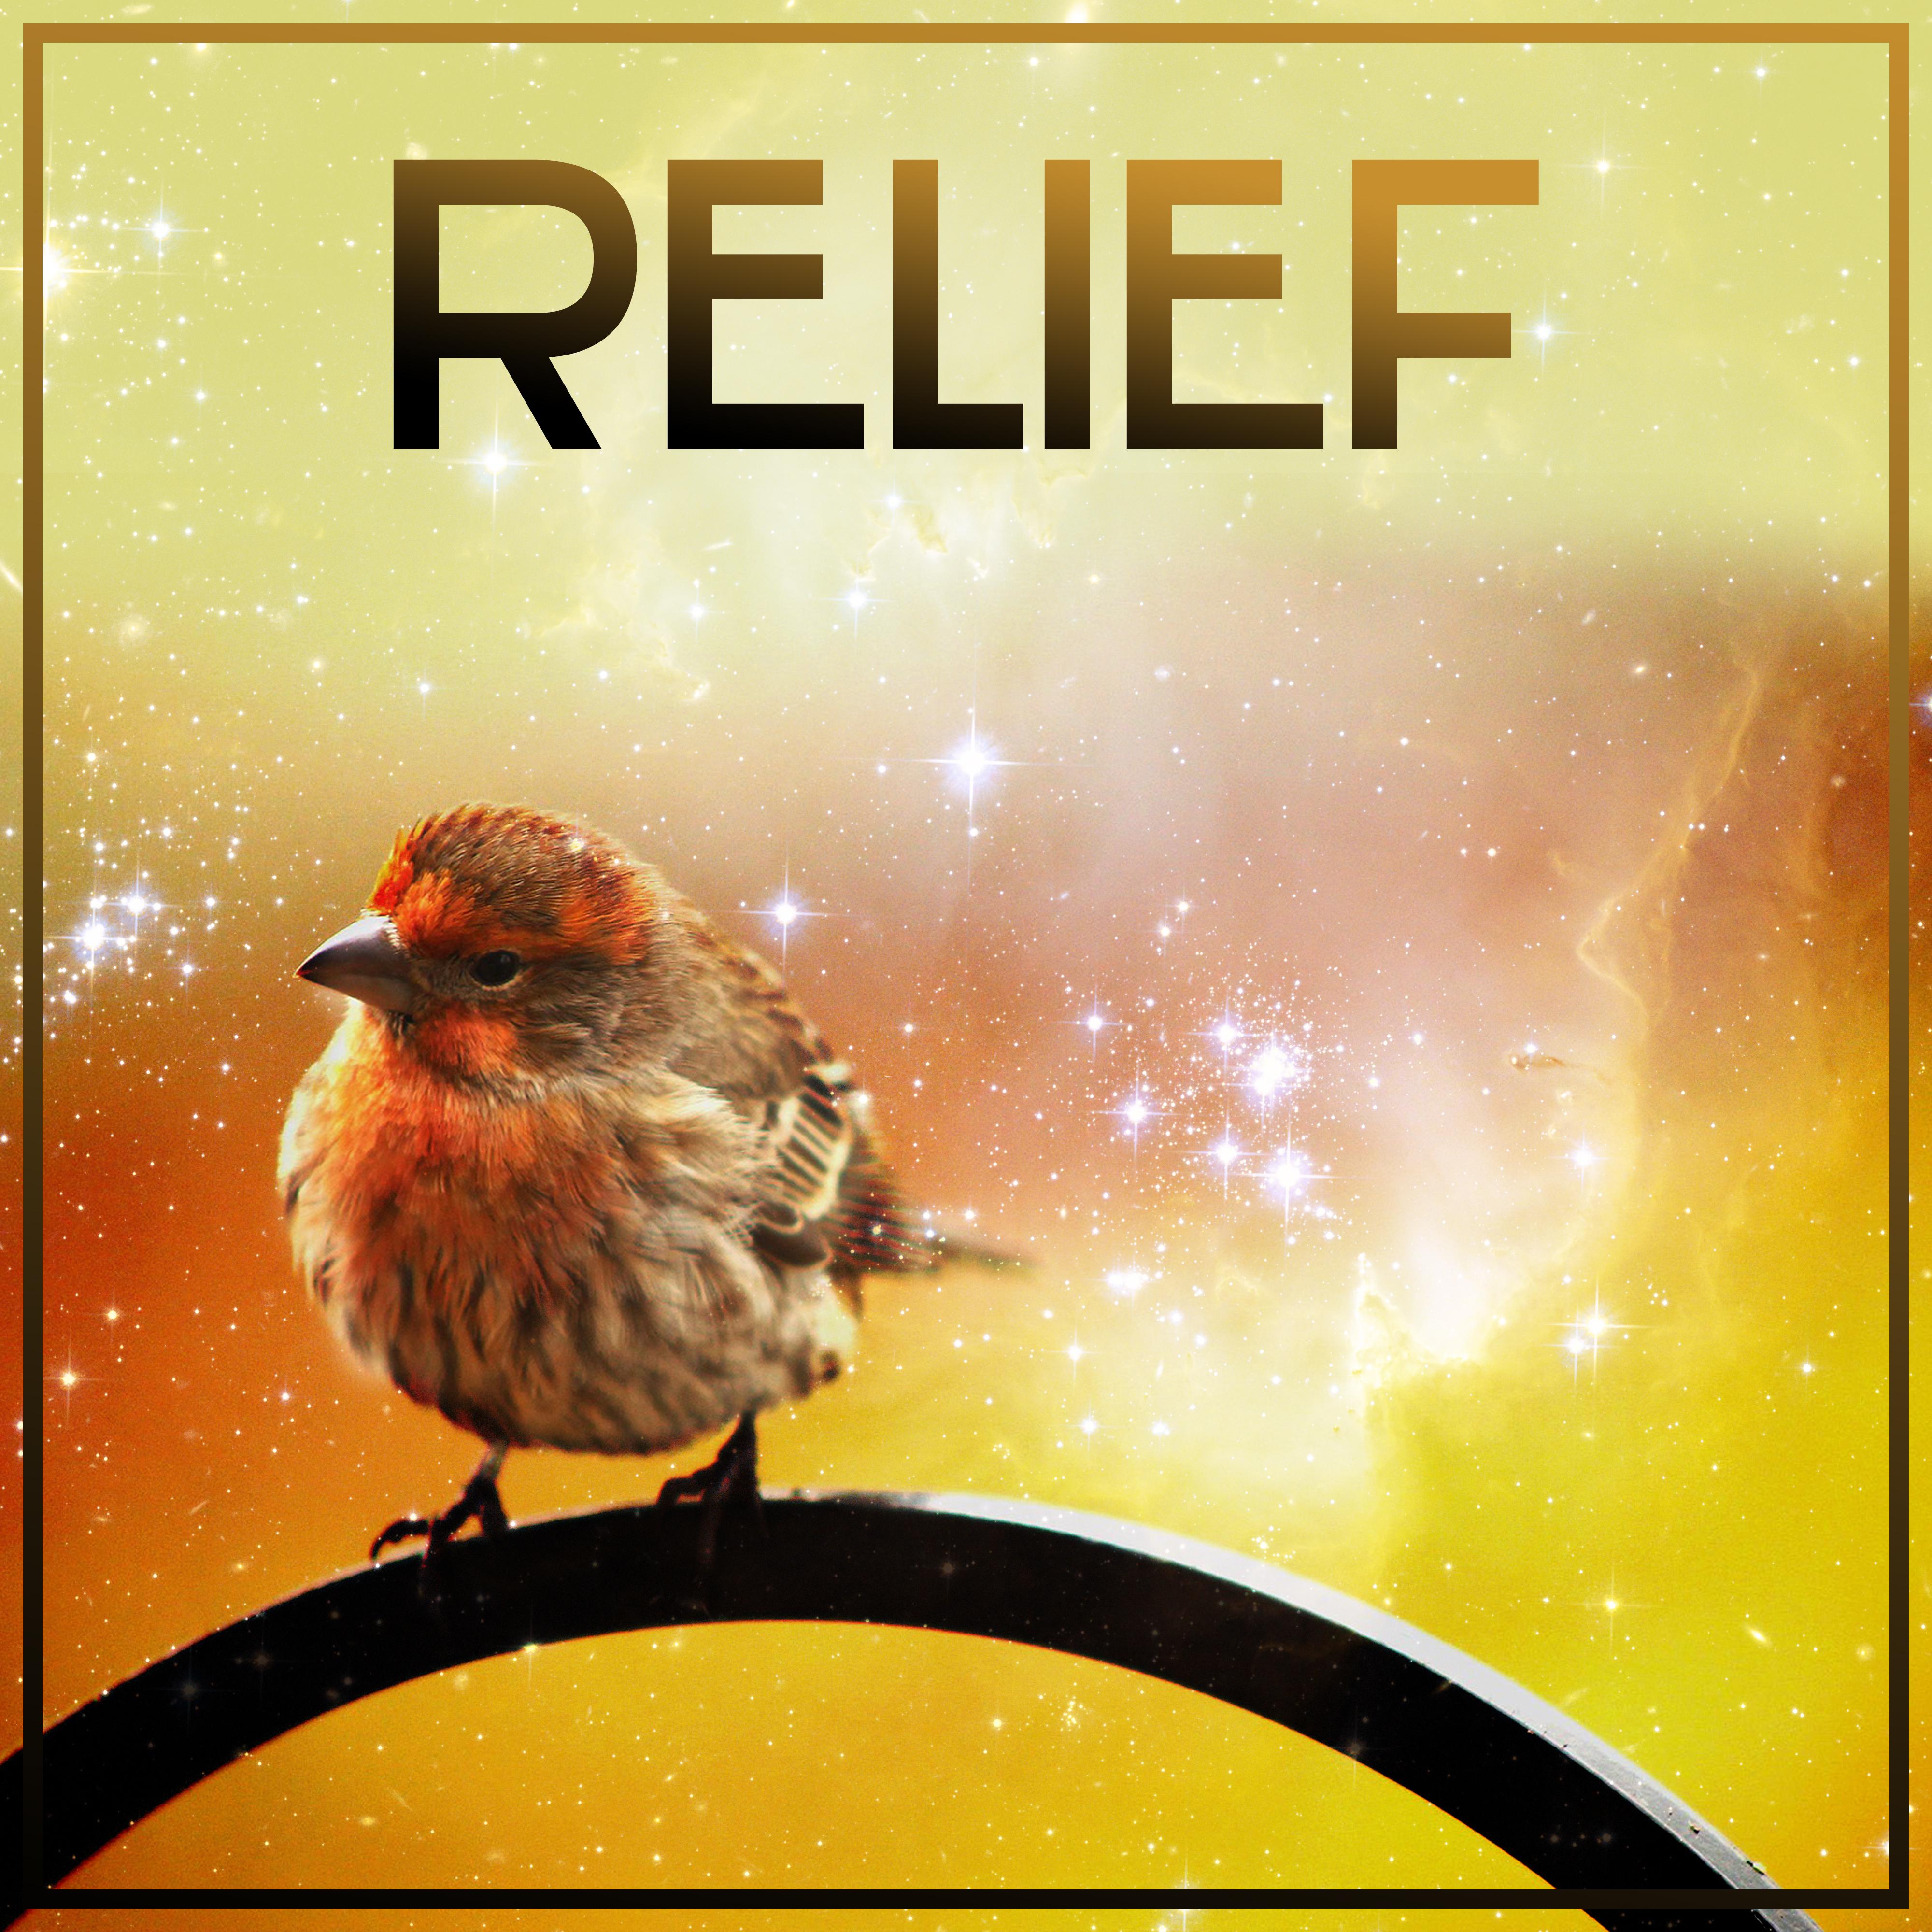 Relief – Nature Sounds for Relaxation, Deep Sleep, Stress Free, Healing Water, Relaxing Waves, Sounds of Sea, Rest, Peaceful Mind